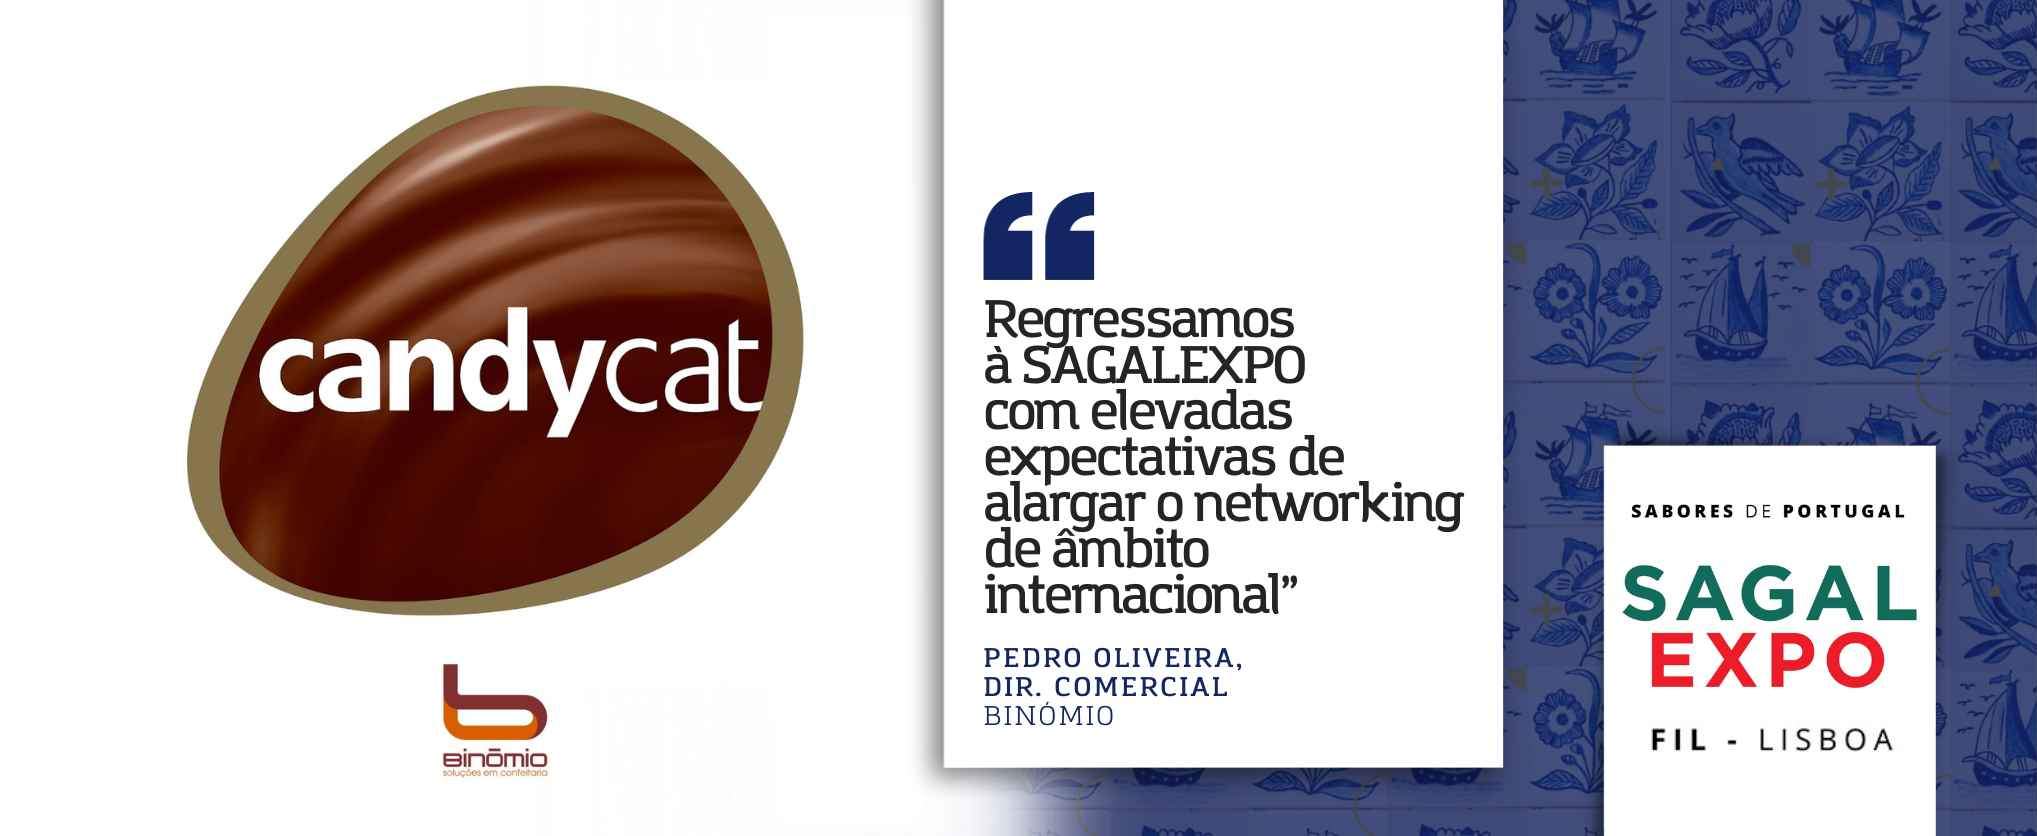 Binómio: "We return to SAGALEXPO with high expectations of expanding our international networking"